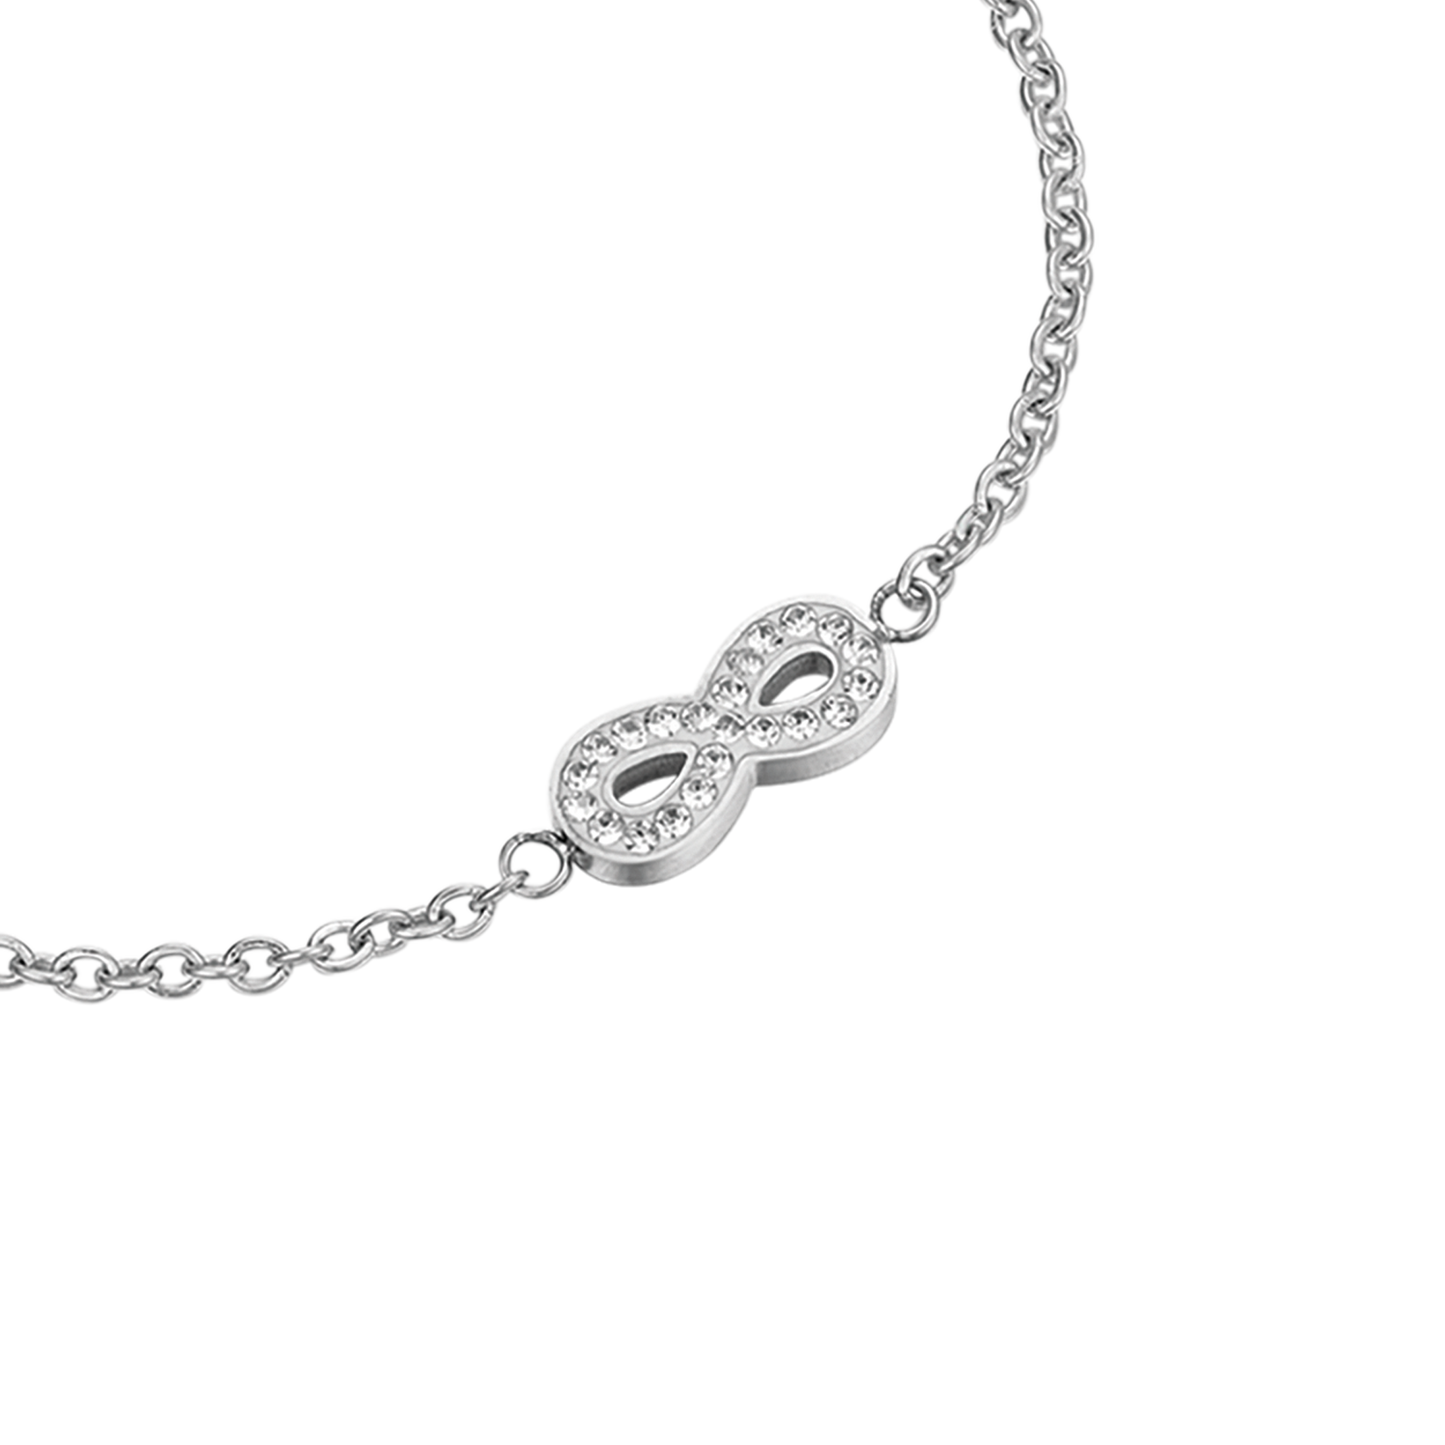 WOMEN'S STEEL BRACELET WITH INFINITY AND CRYSTALS